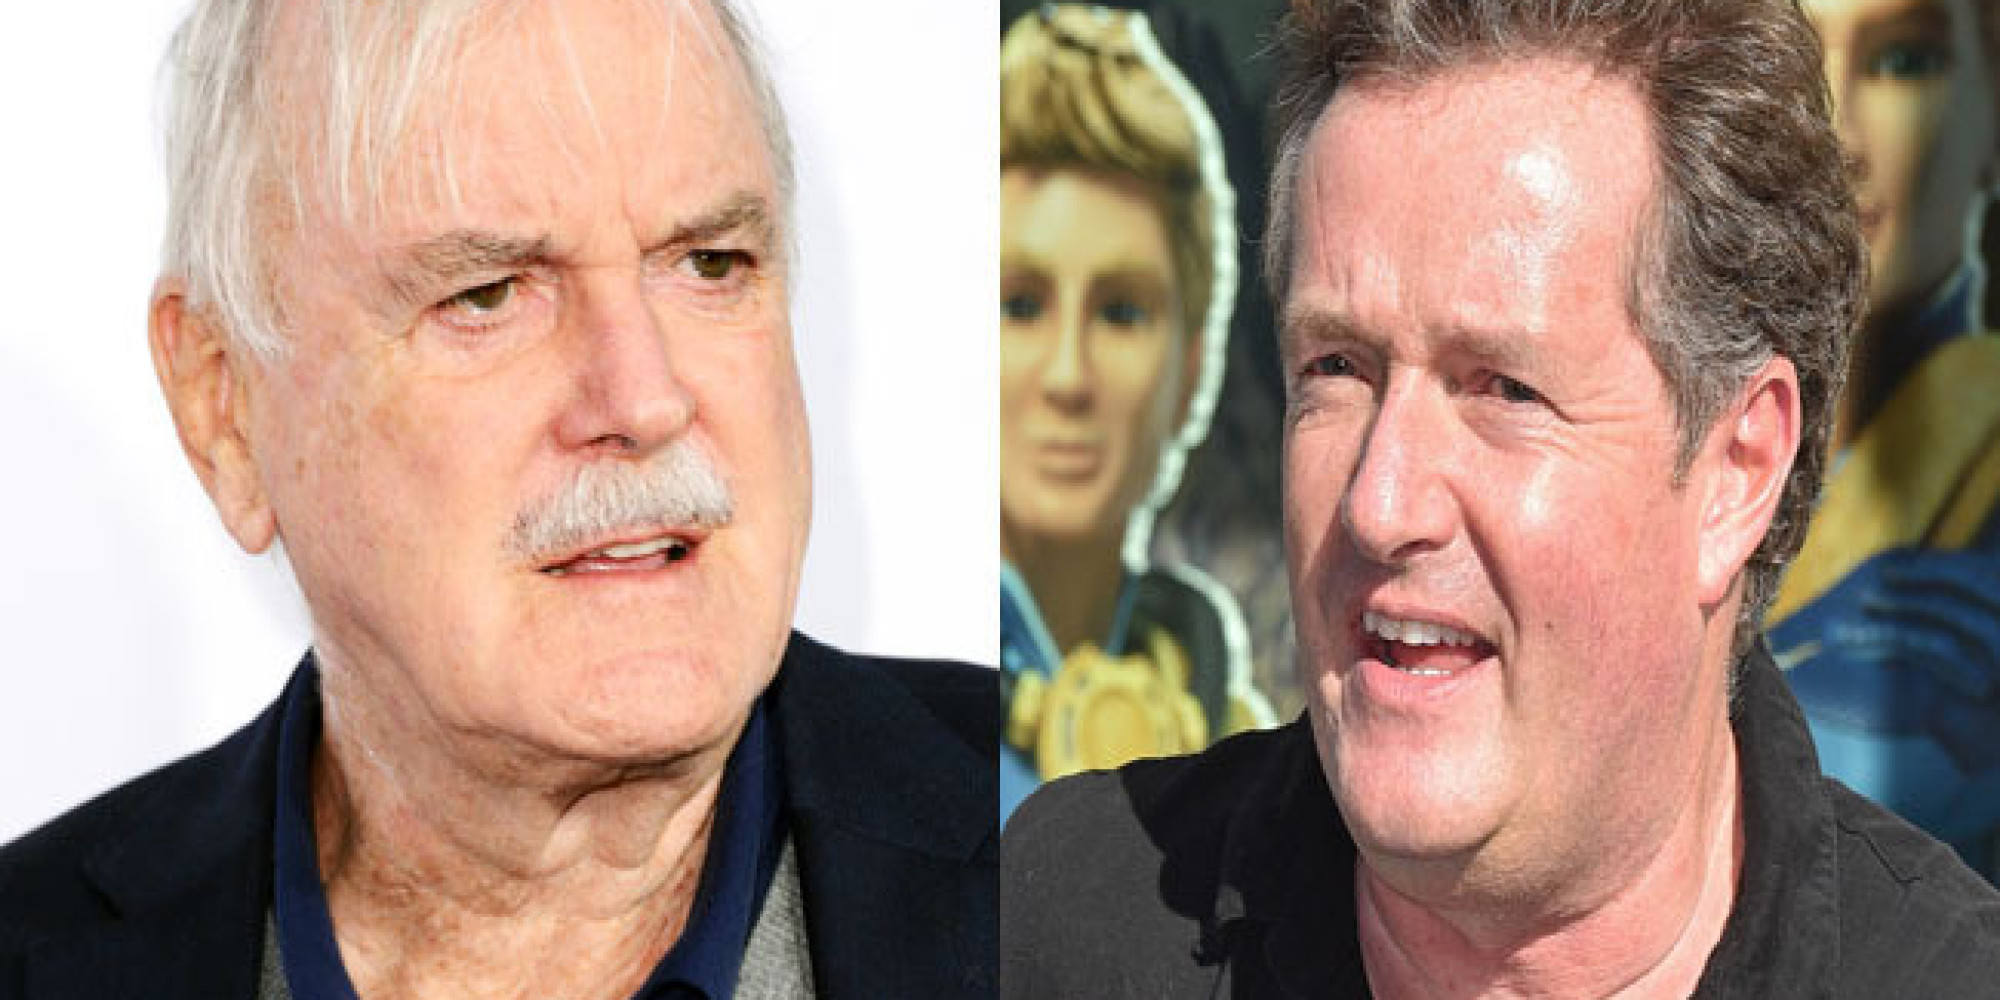 Piers Morgan Apologises To John Cleese Over Twitter Spat. Kind of... | HuffPost UK